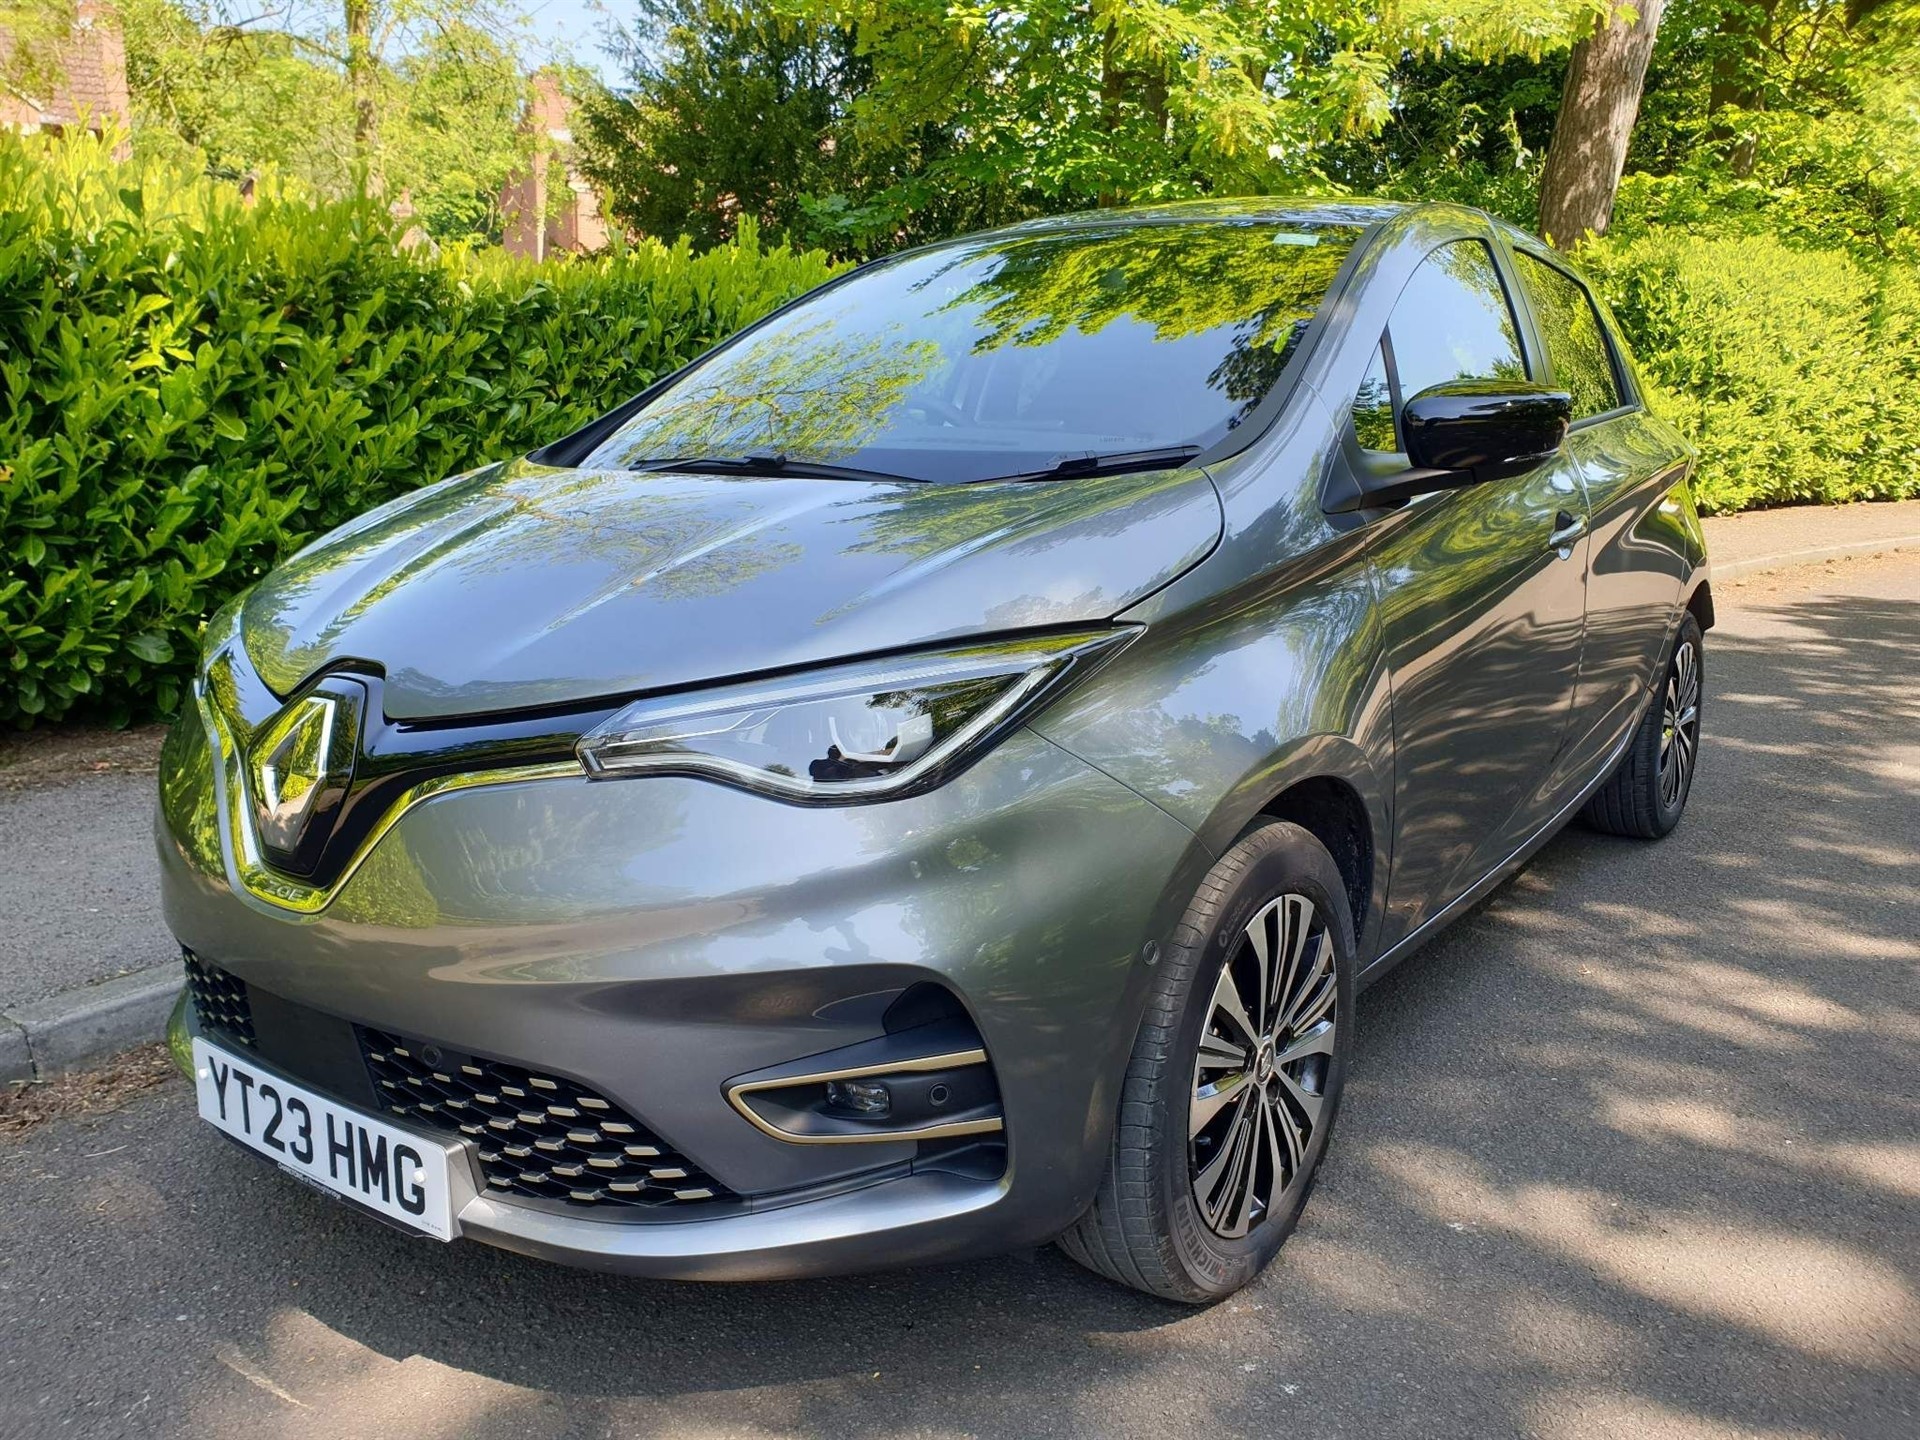 Used Renault Zoe for sale in York, North Yorkshire